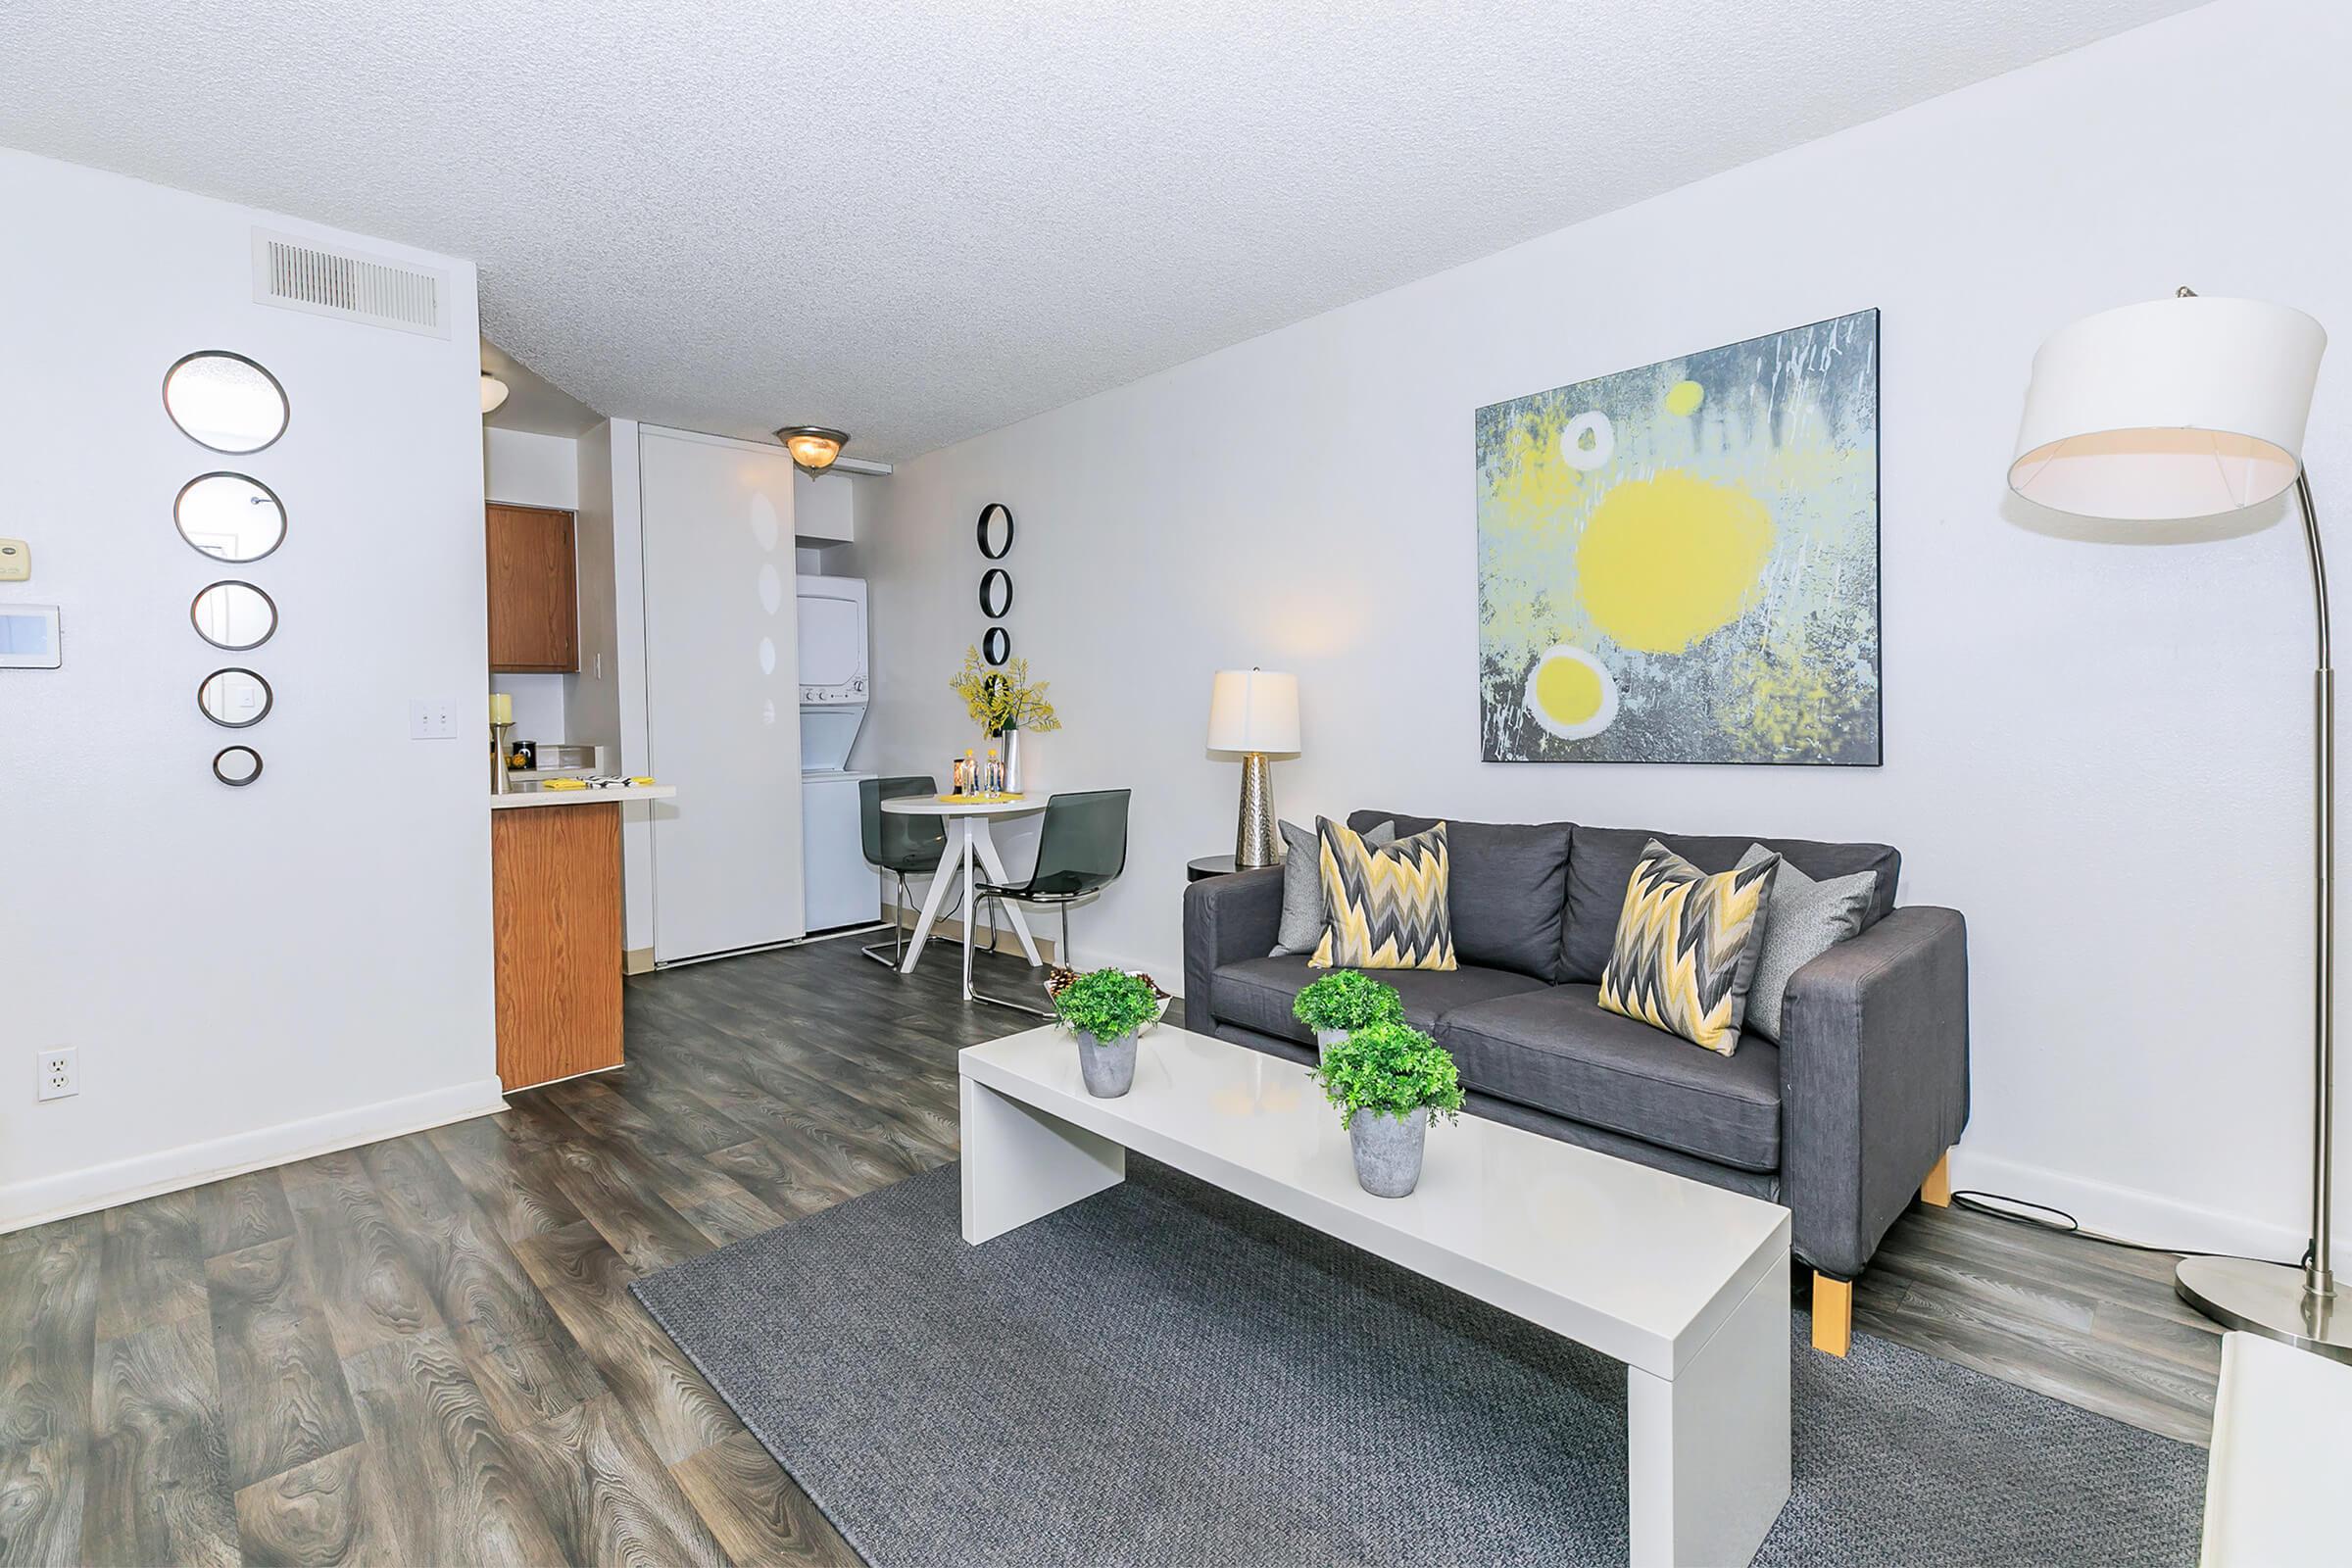 A cozy apartment with wood-style floors, a couch and dining area at Rise North Ridge.